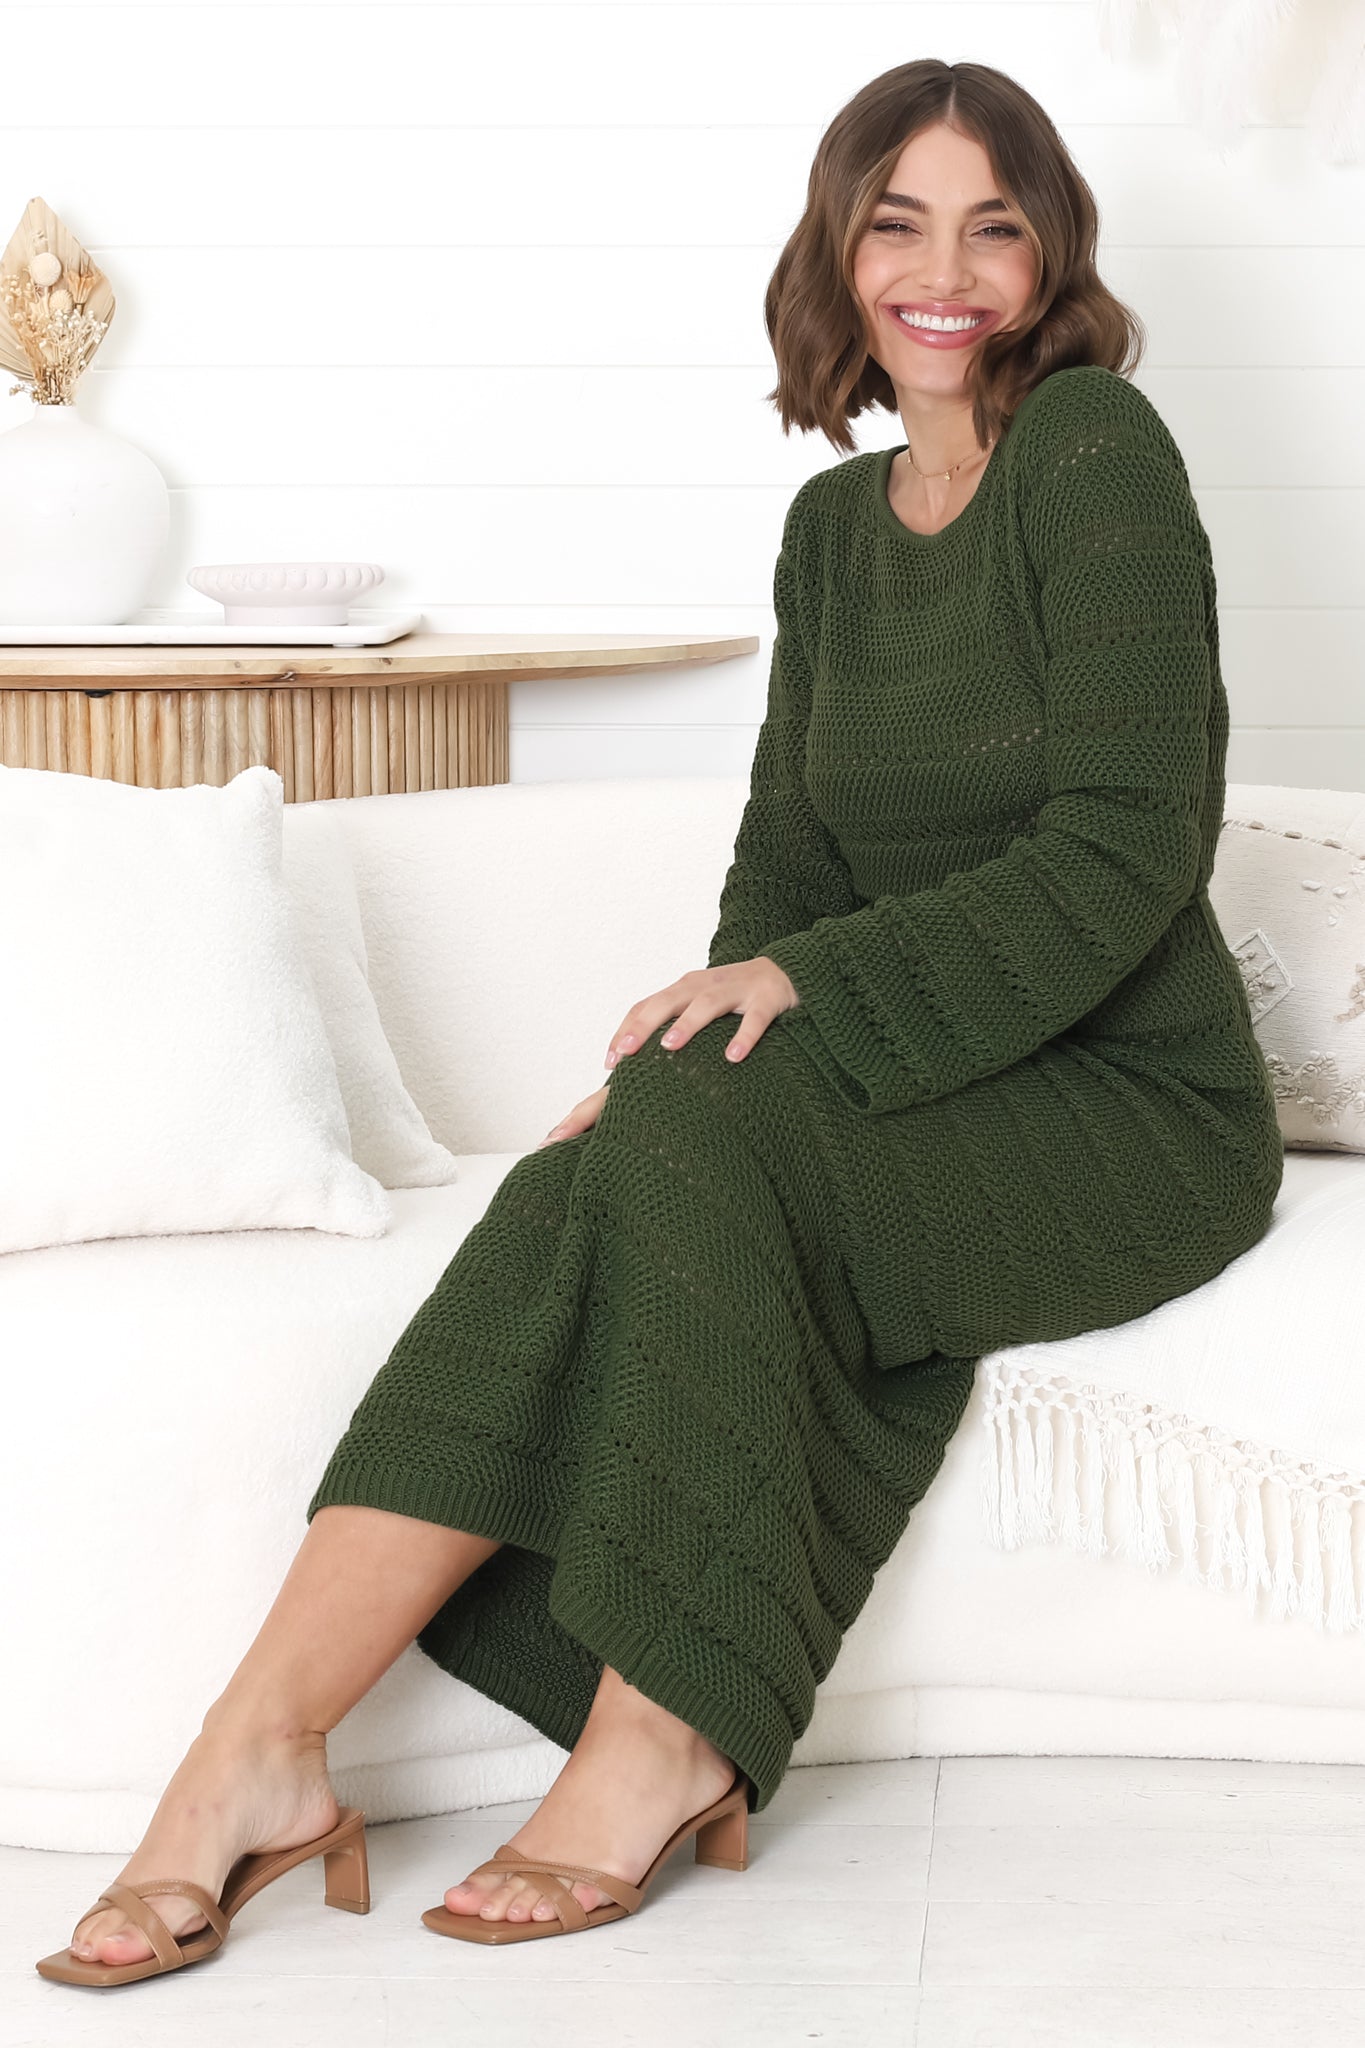 Dayside Knit Maxi Dress - Body Con Knit Dress with Plaited Belt in Green